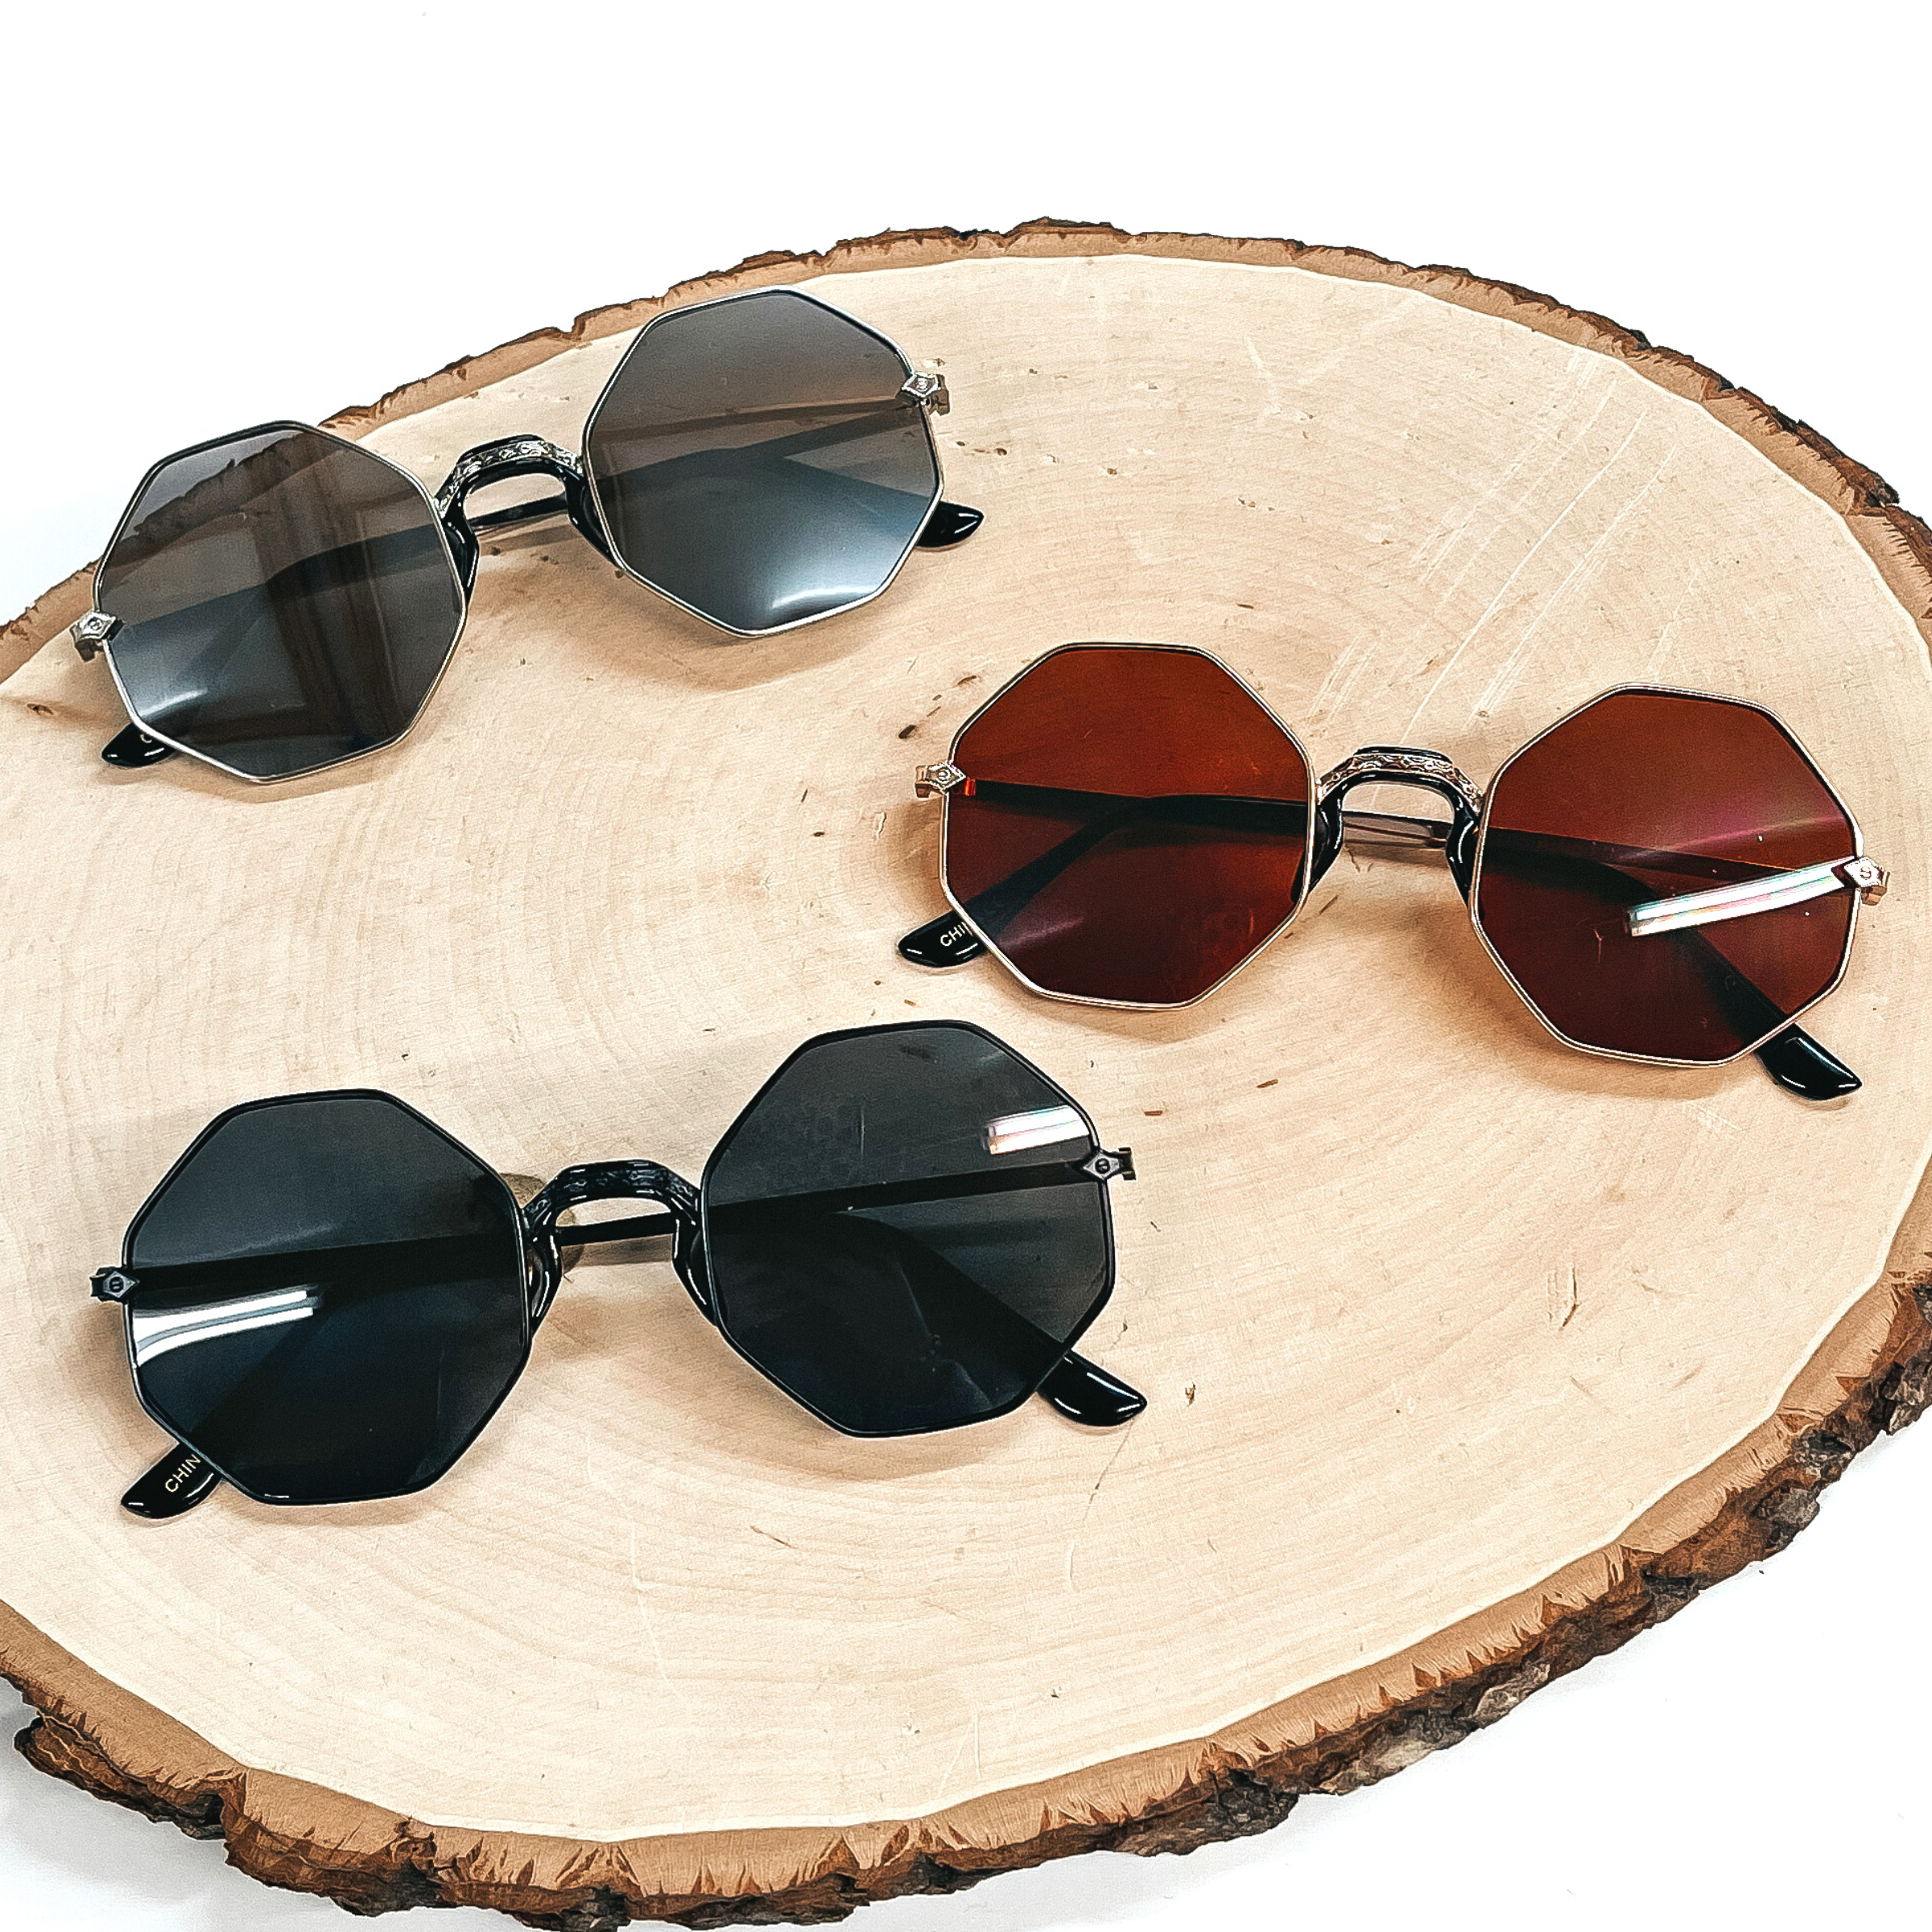 These are three pairs of octagon sunglasses in black, brown, and silver. These sunglasses are taken on a  brown wooden slate and on a white background.